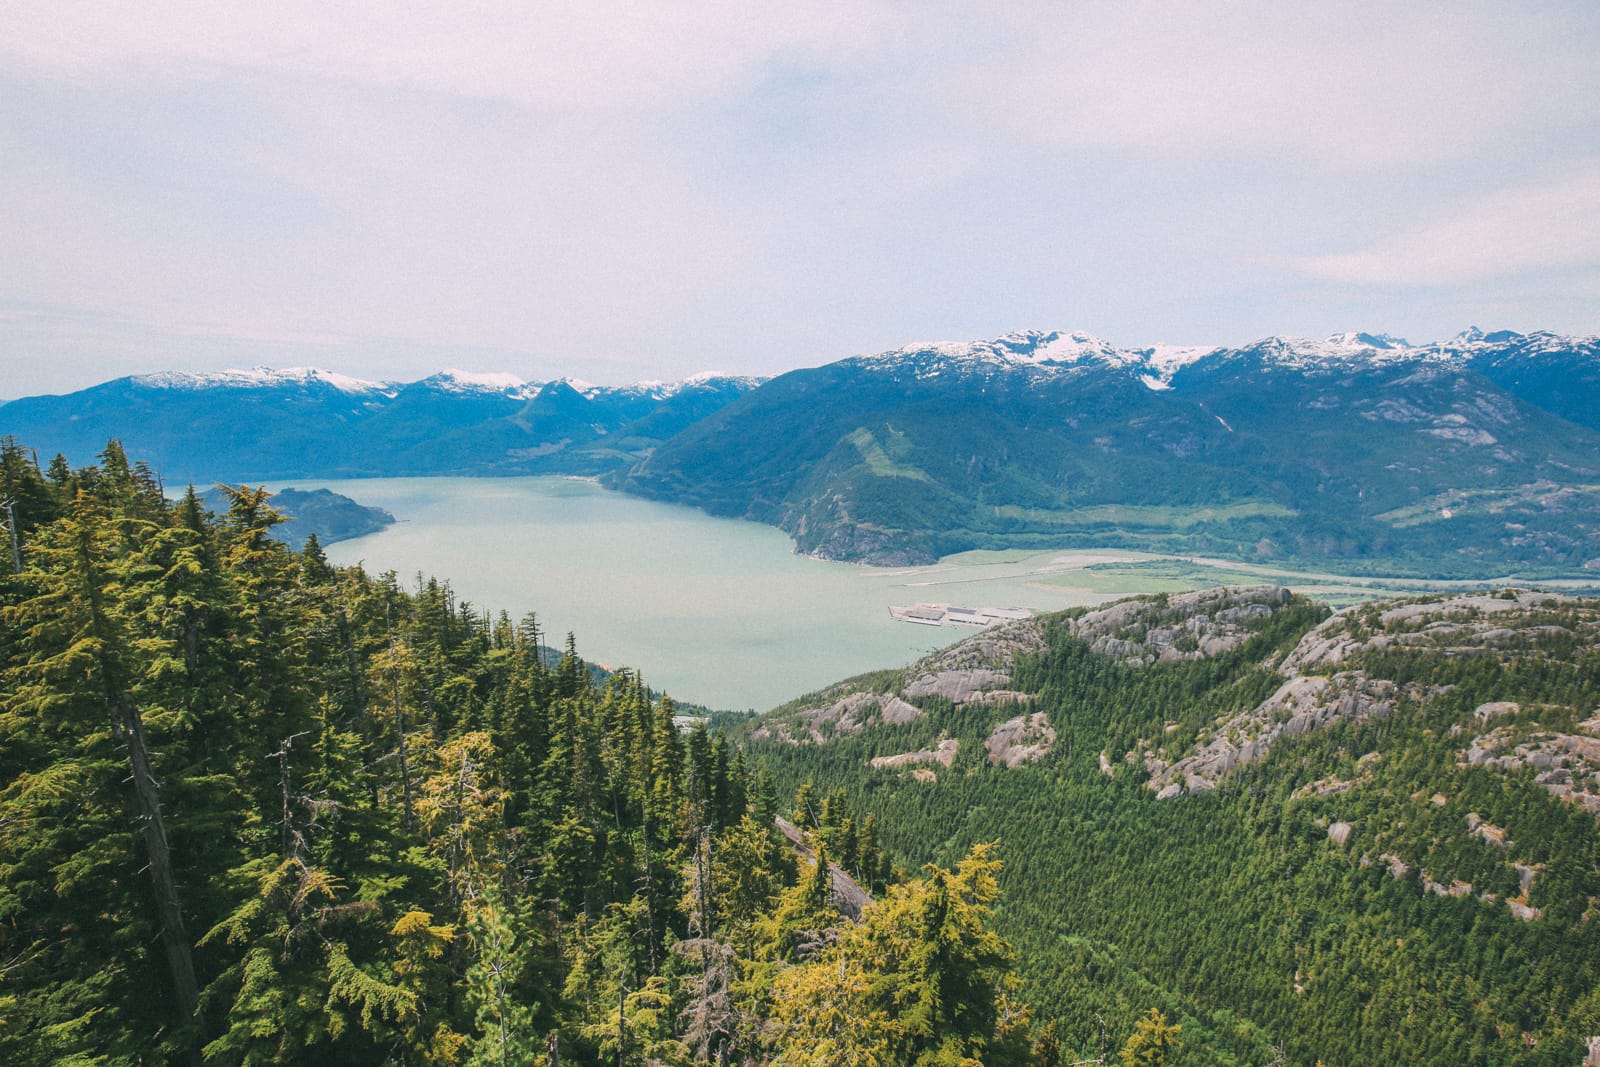 A Day In Squamish - One Of The Best Views In British Columbia, Canada (21)